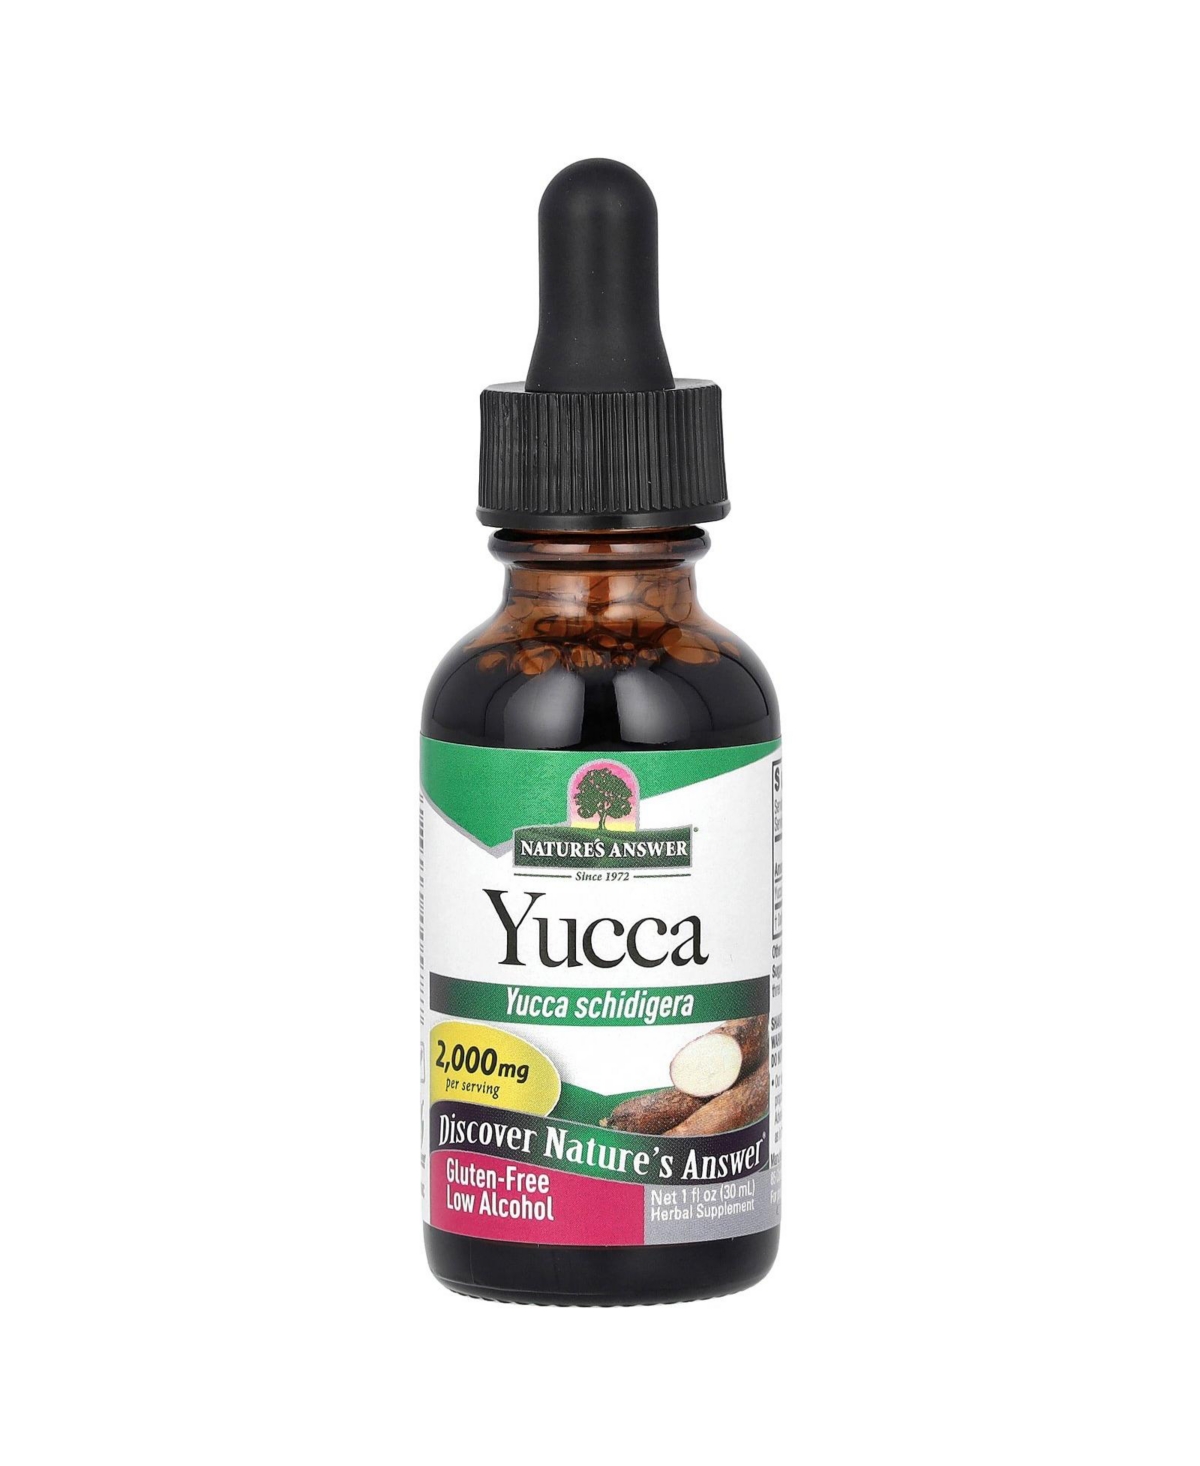 Yucca 2 000 mg - 1 fl oz (30 ml) - Assorted Pre-pack (See Table